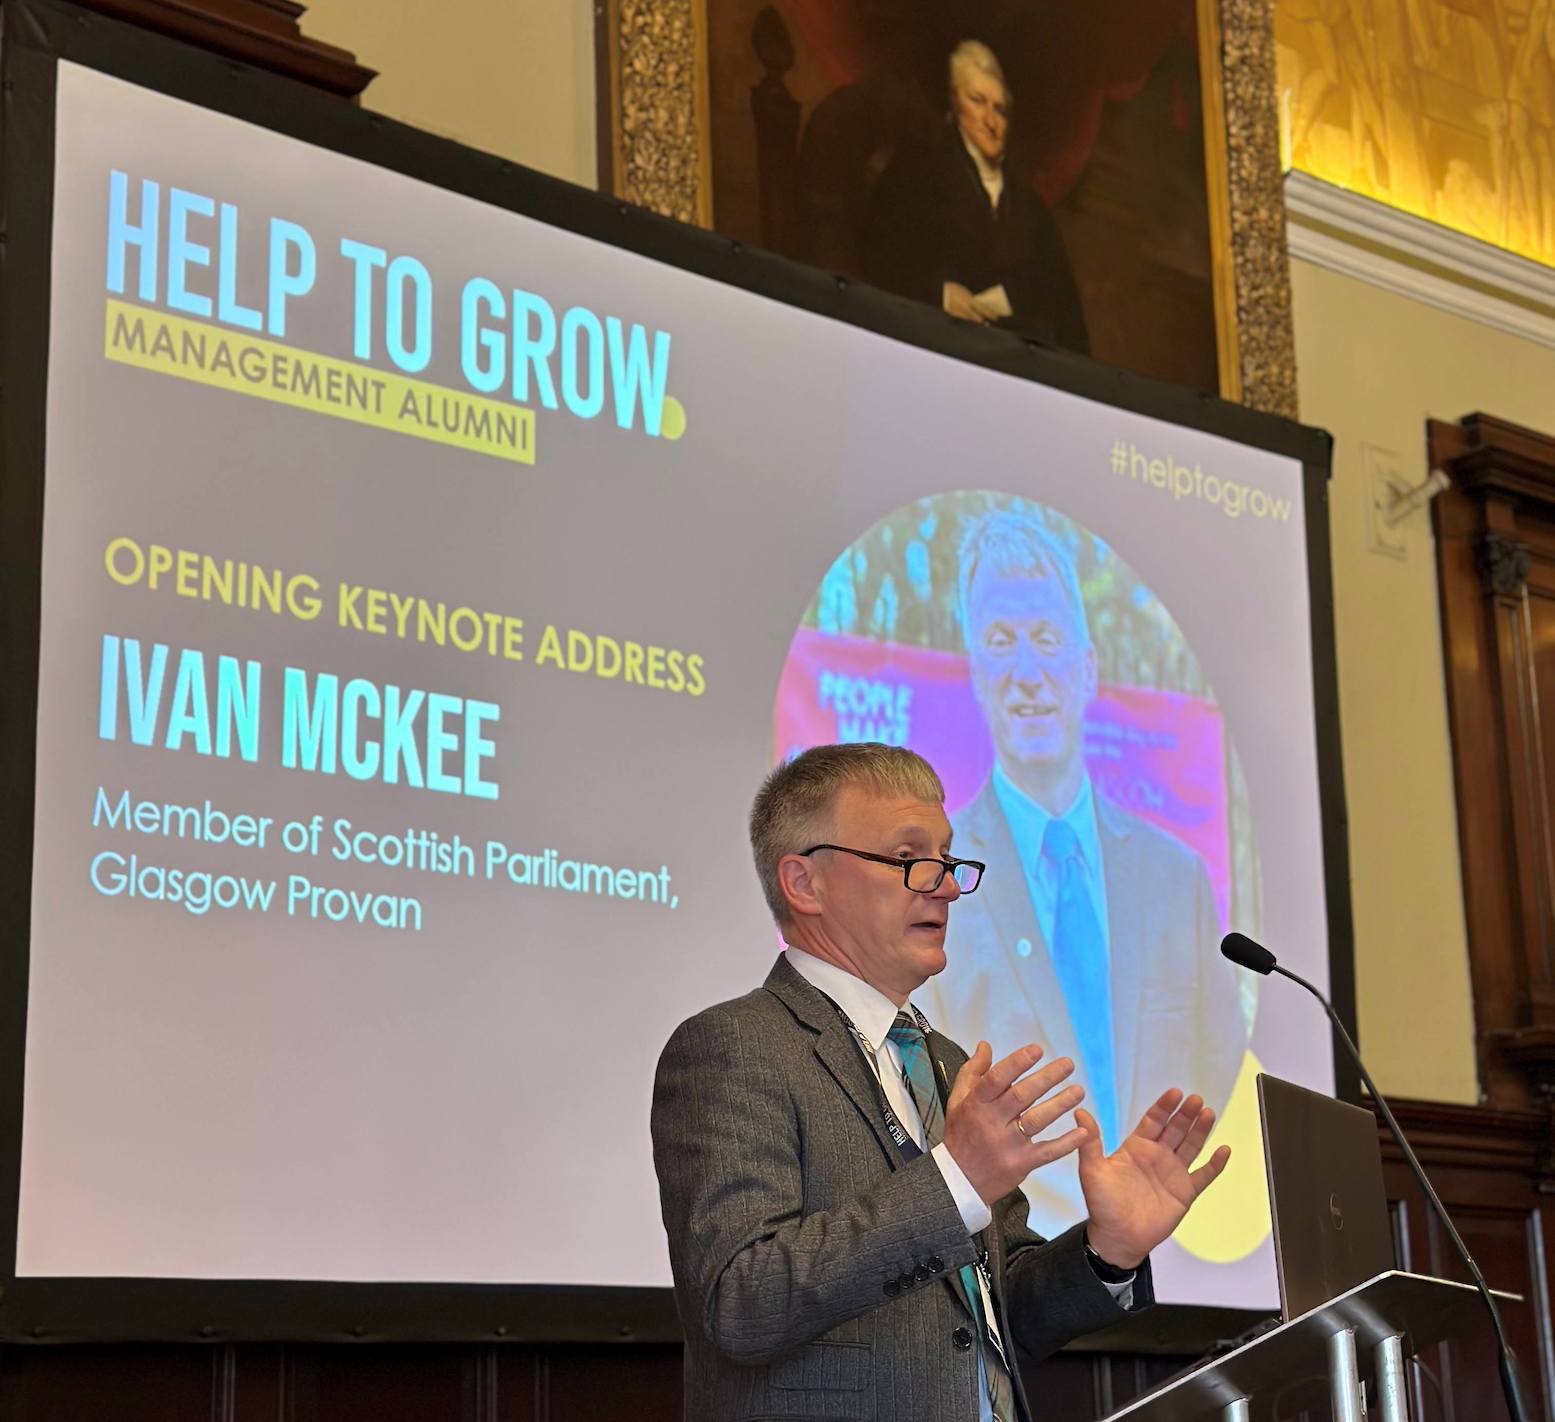 Ivan McKee champions SMEs at Help to Grow: Management Alumni event